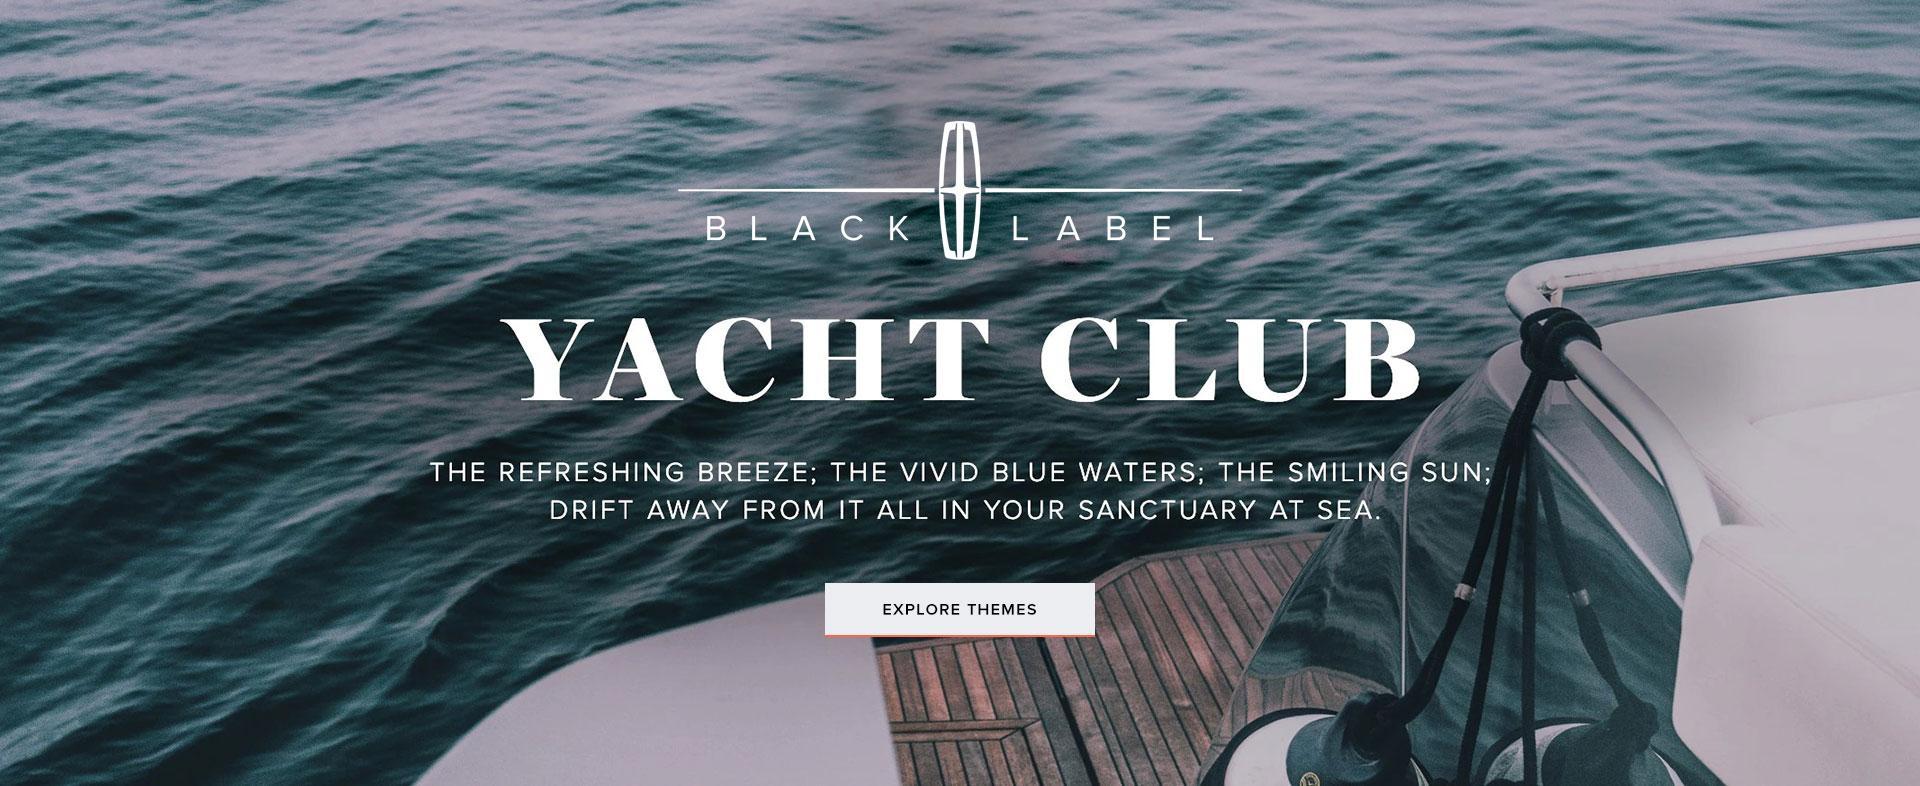 Lincoln Black Label Yacht Club | South Bay Lincoln